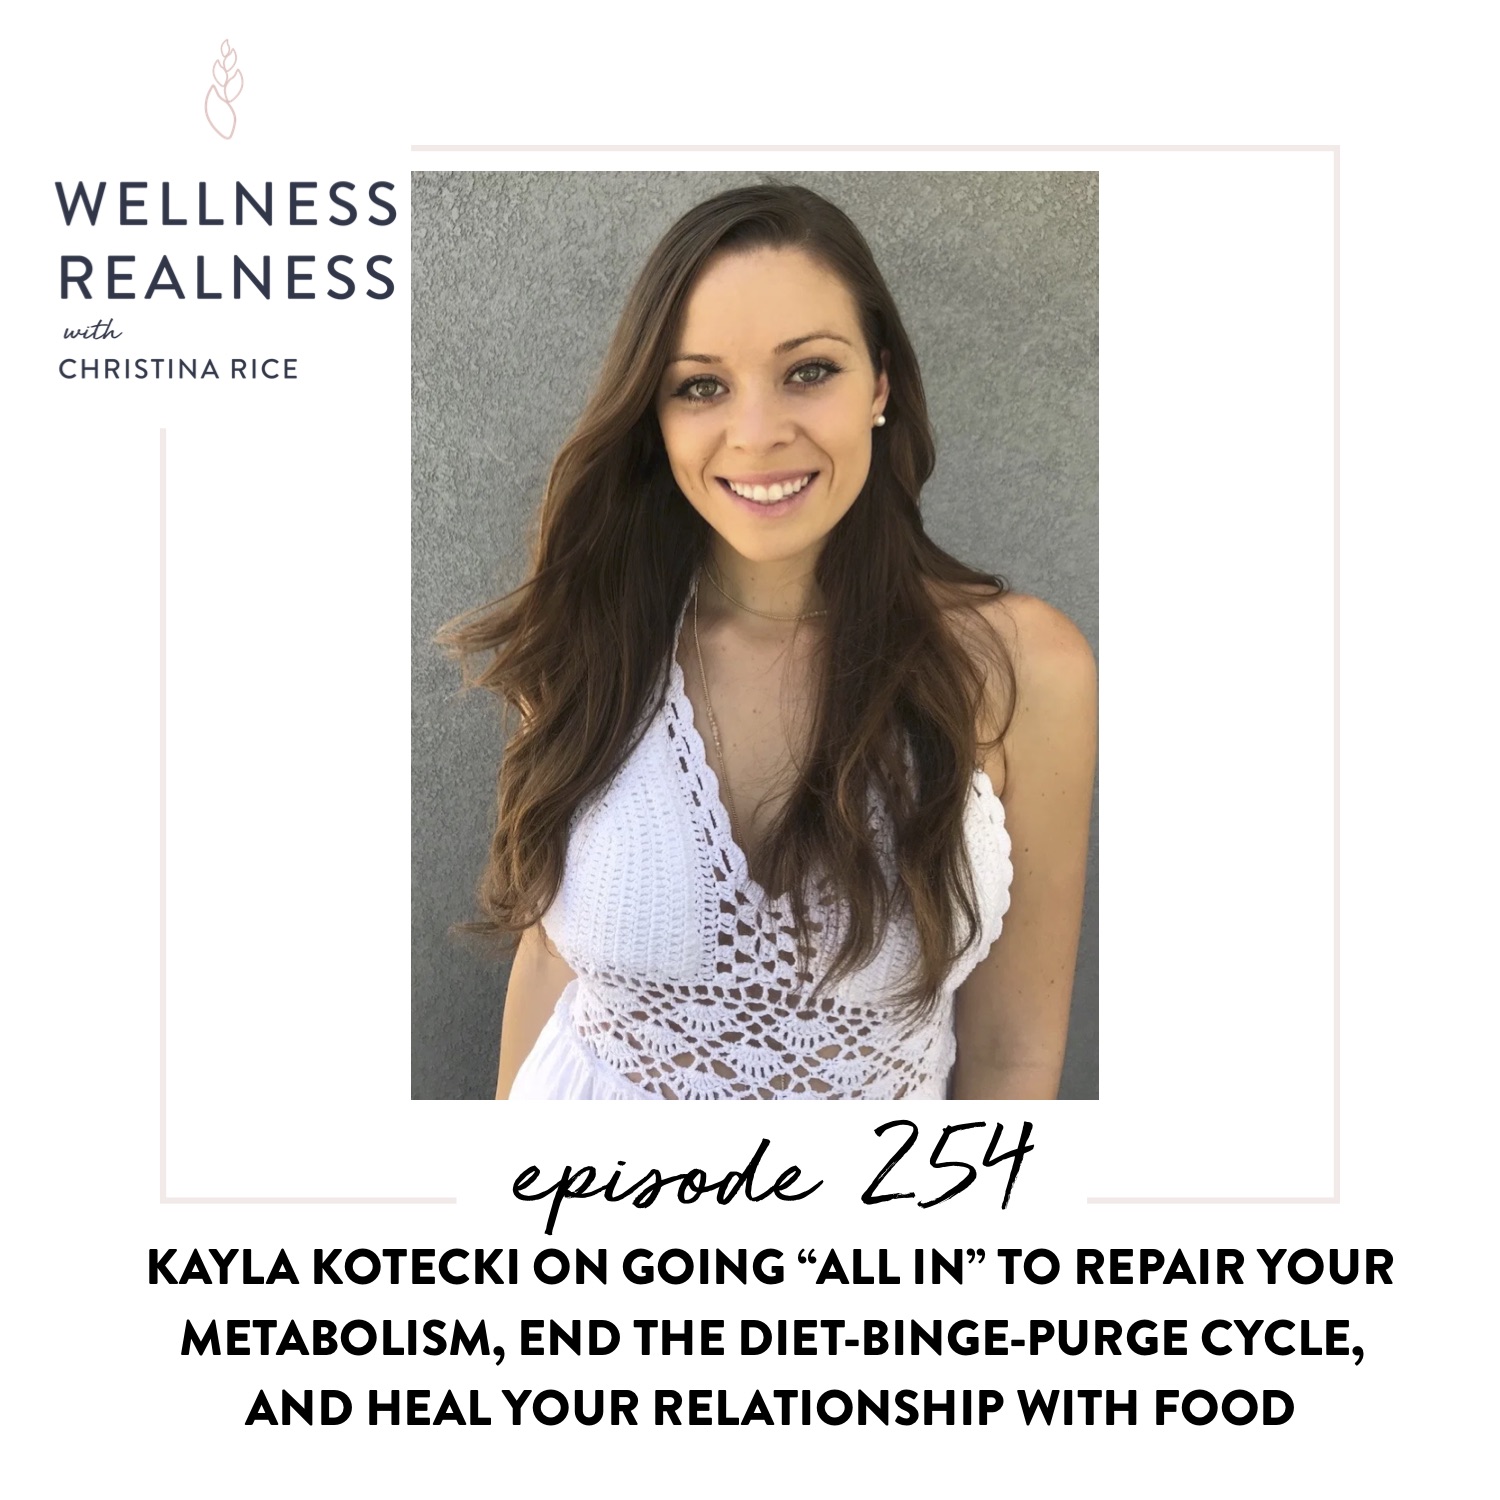 254: Kayla Kotecki on Going “All In” to Repair Your Metabolism, End the Diet-Binge-Purge Cycle, and Heal Your Relationship with Food